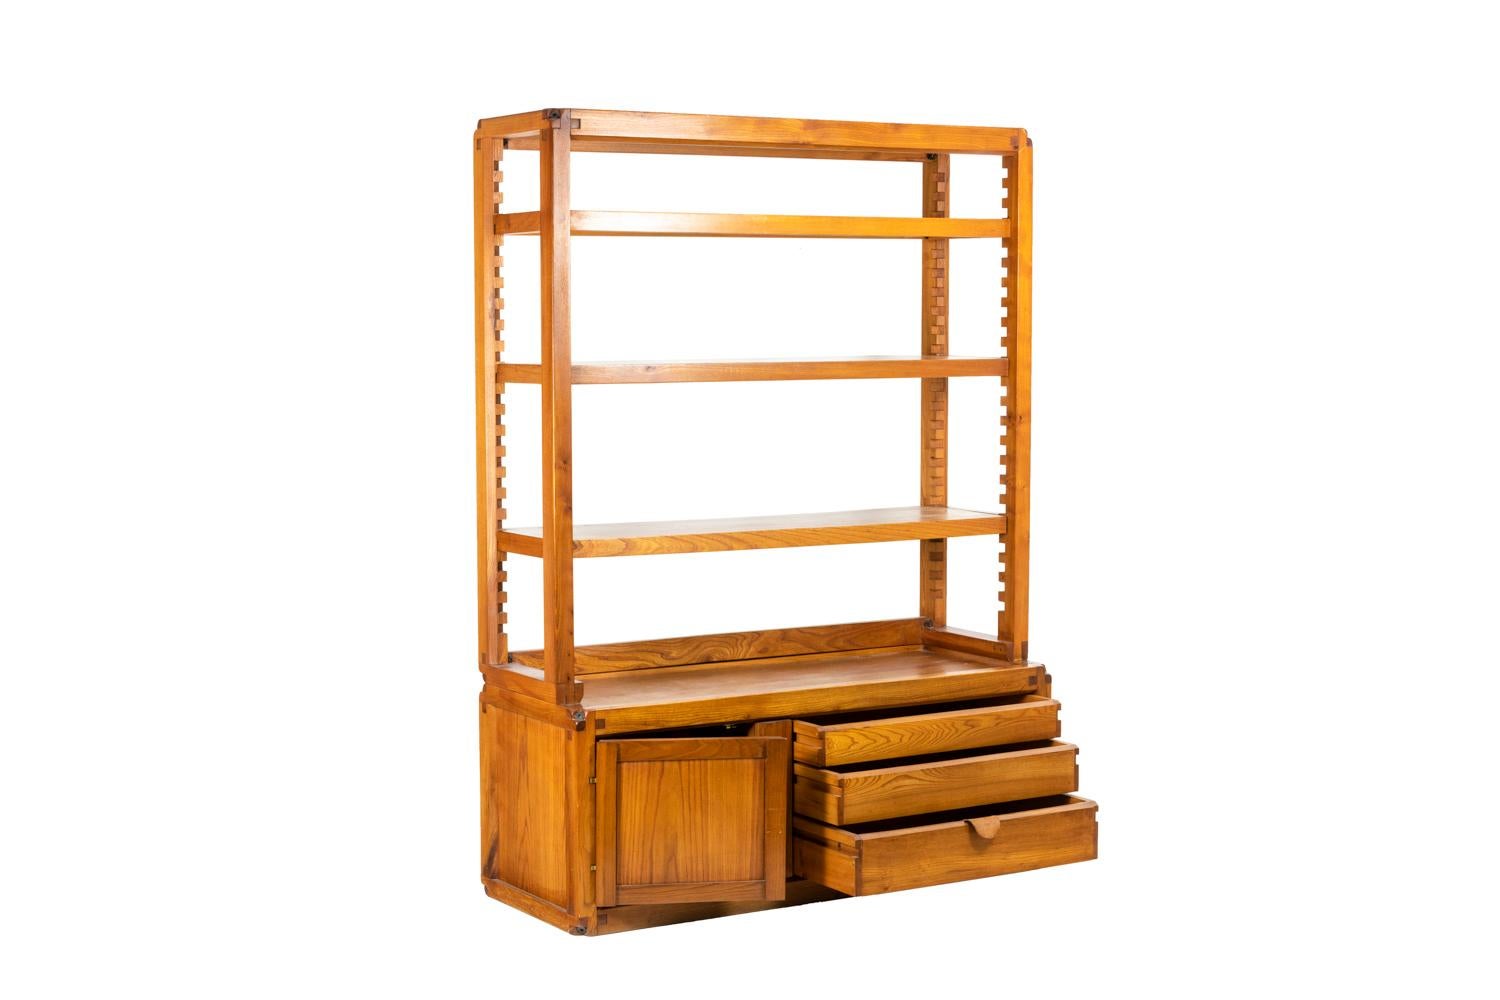 Pierre Chapo, signed.

Shelves cabinet in natural elm composed, in the lower part, by a storage buffet opening with three drawers and presenting a compartment topped by a shelf composed of four tablets.

Model B10.

Source: Hugues Magen